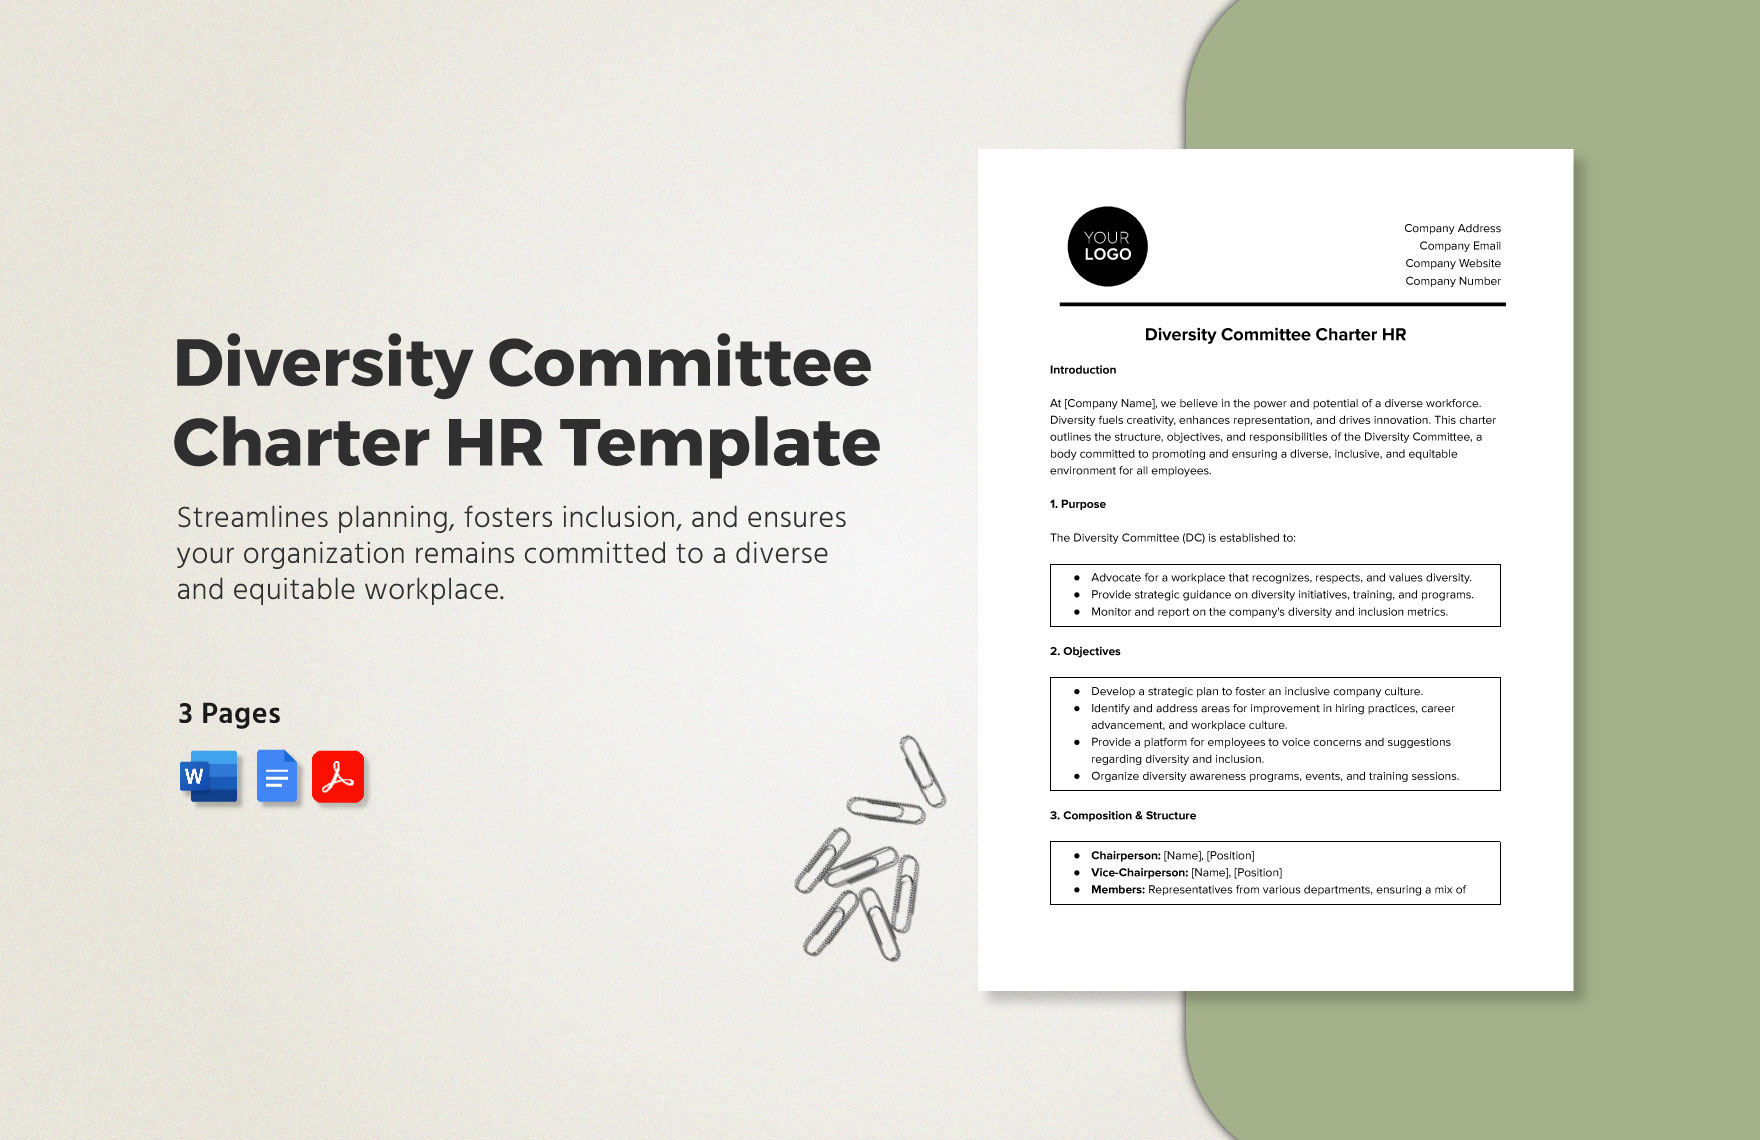 Diversity Committee Charter HR Template